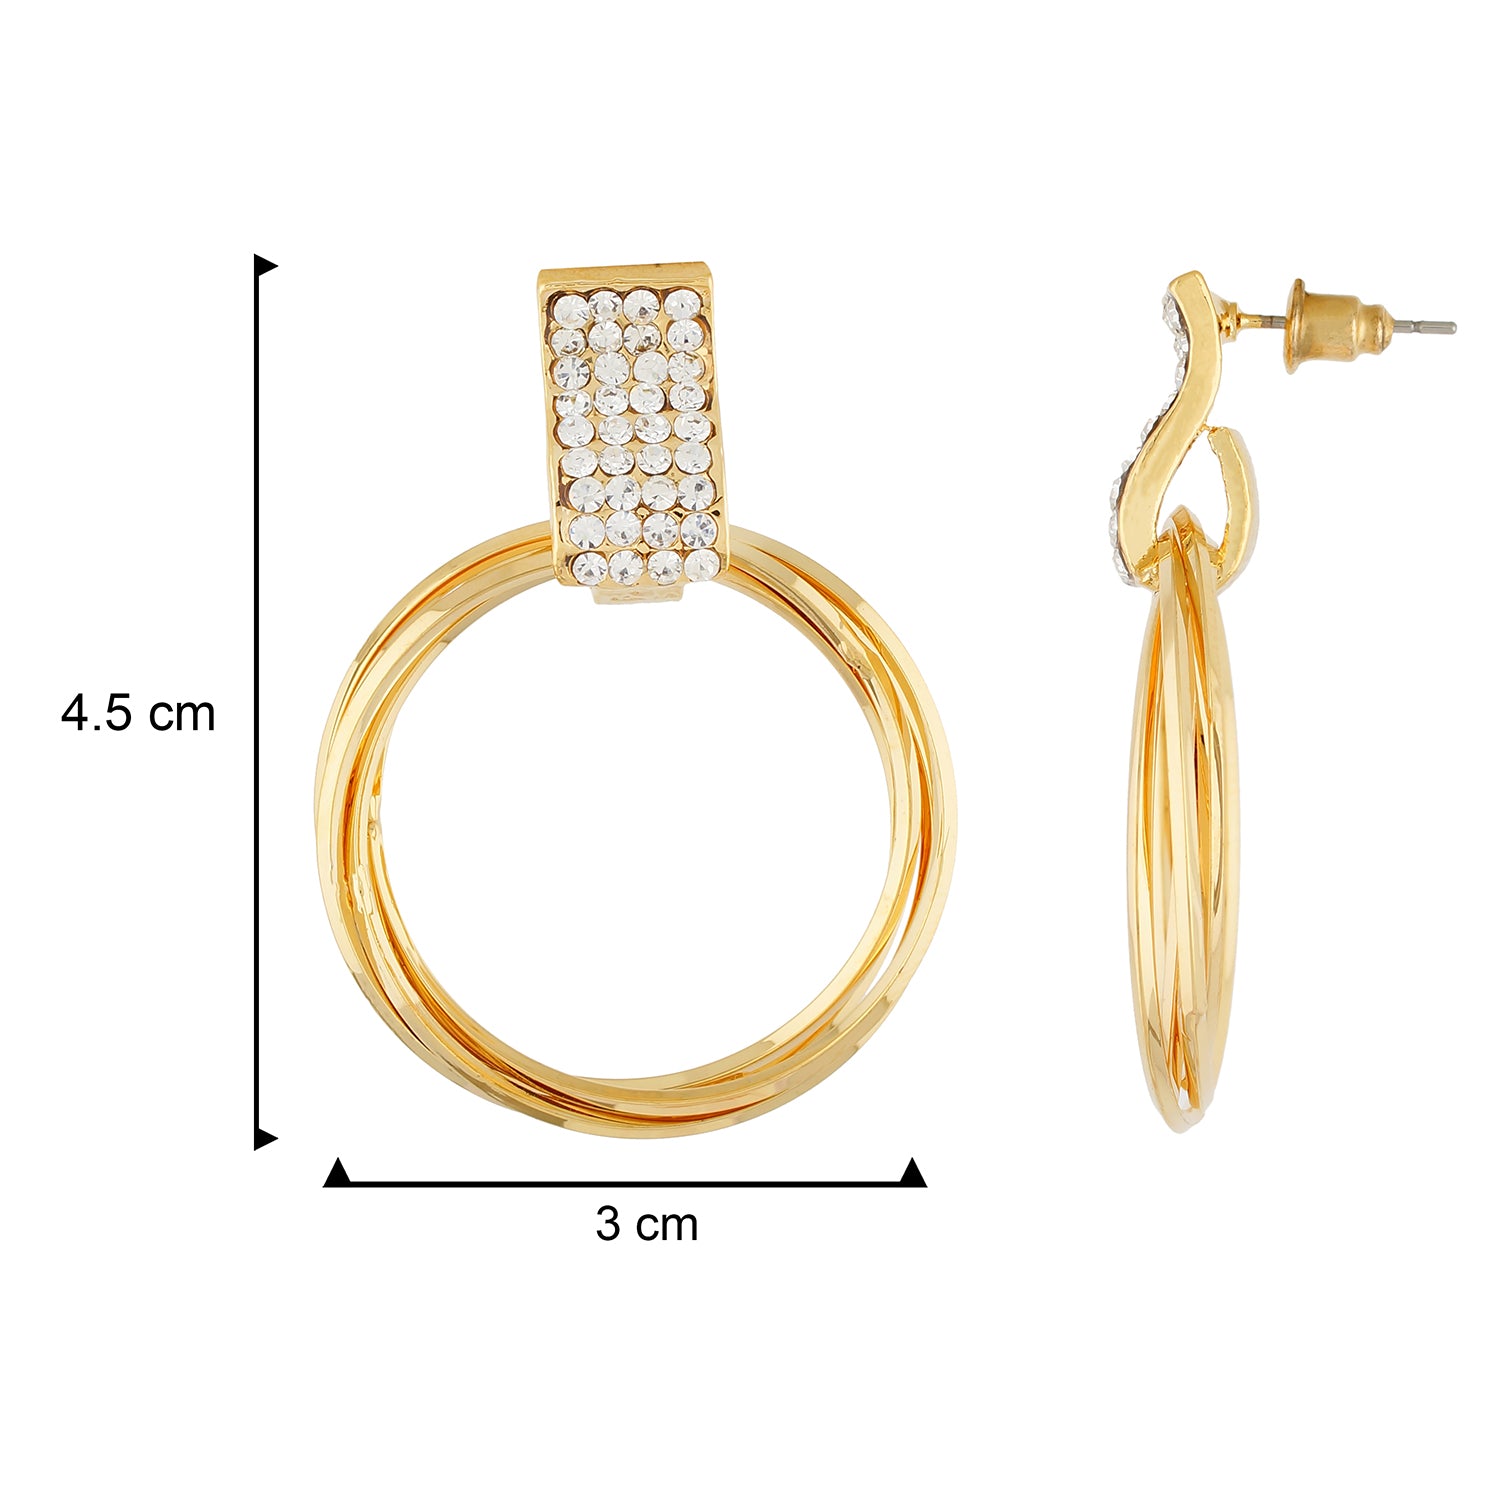 Classy Gold Colour Round Ring Design Earring for Girls and Women